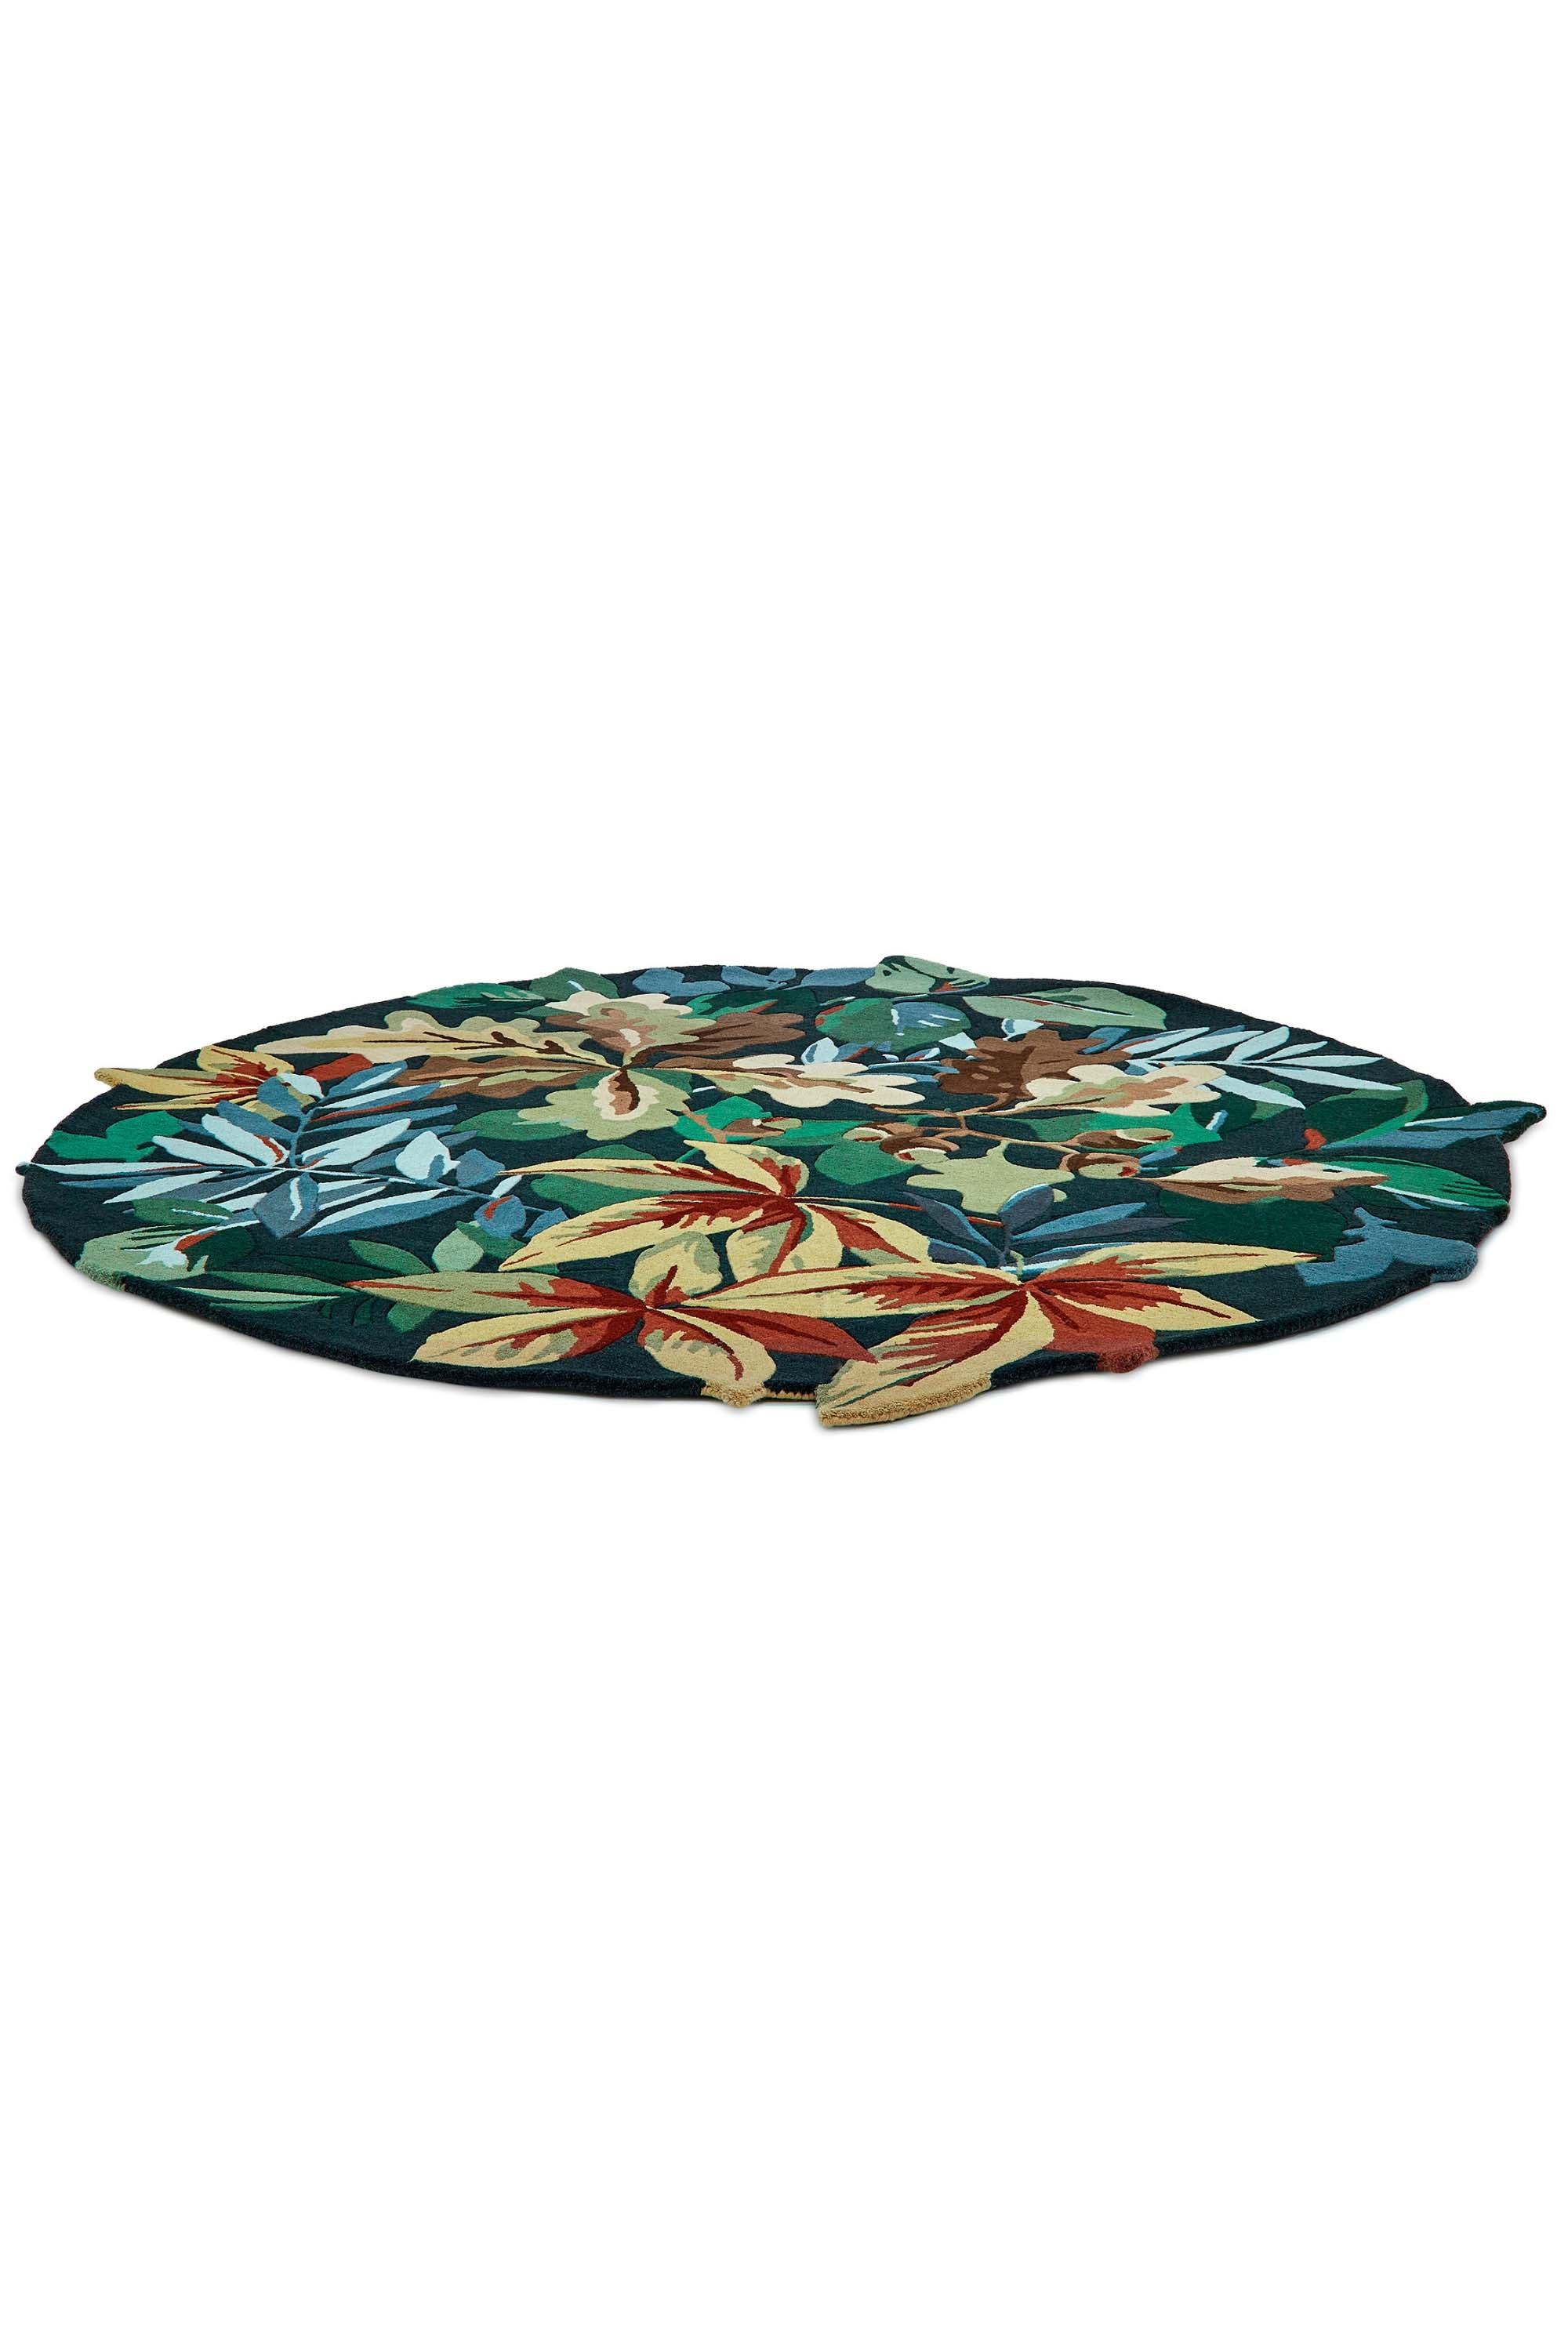 Circle floral rug with extruding pattern in blue and natural tones